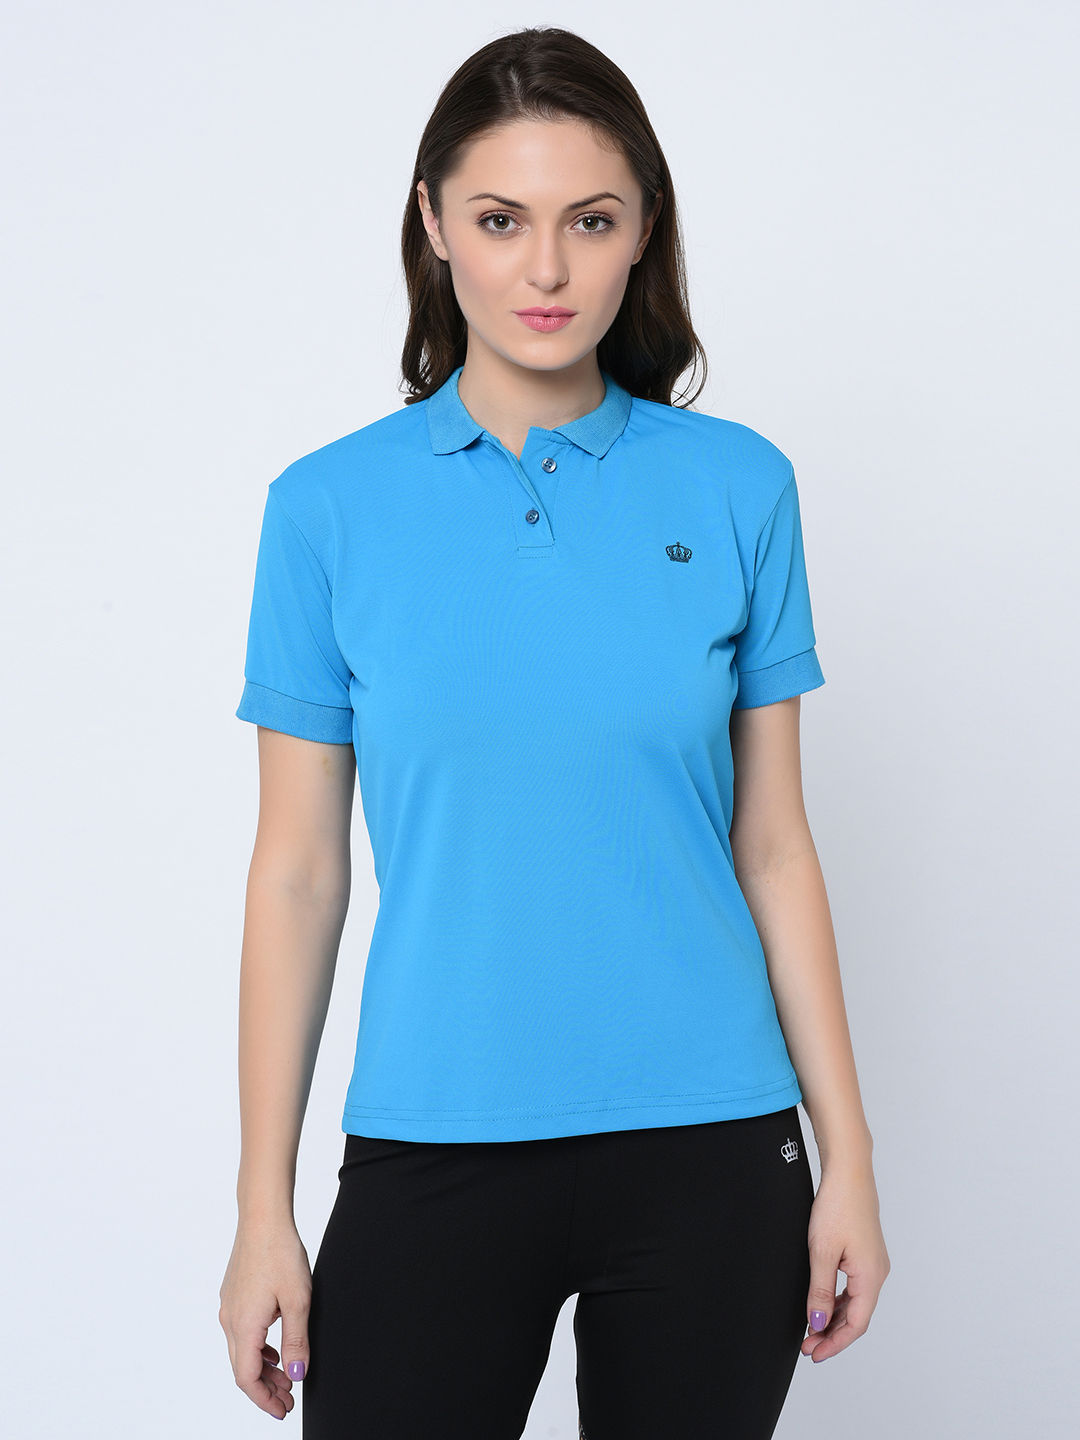 polo neck t shirts for women